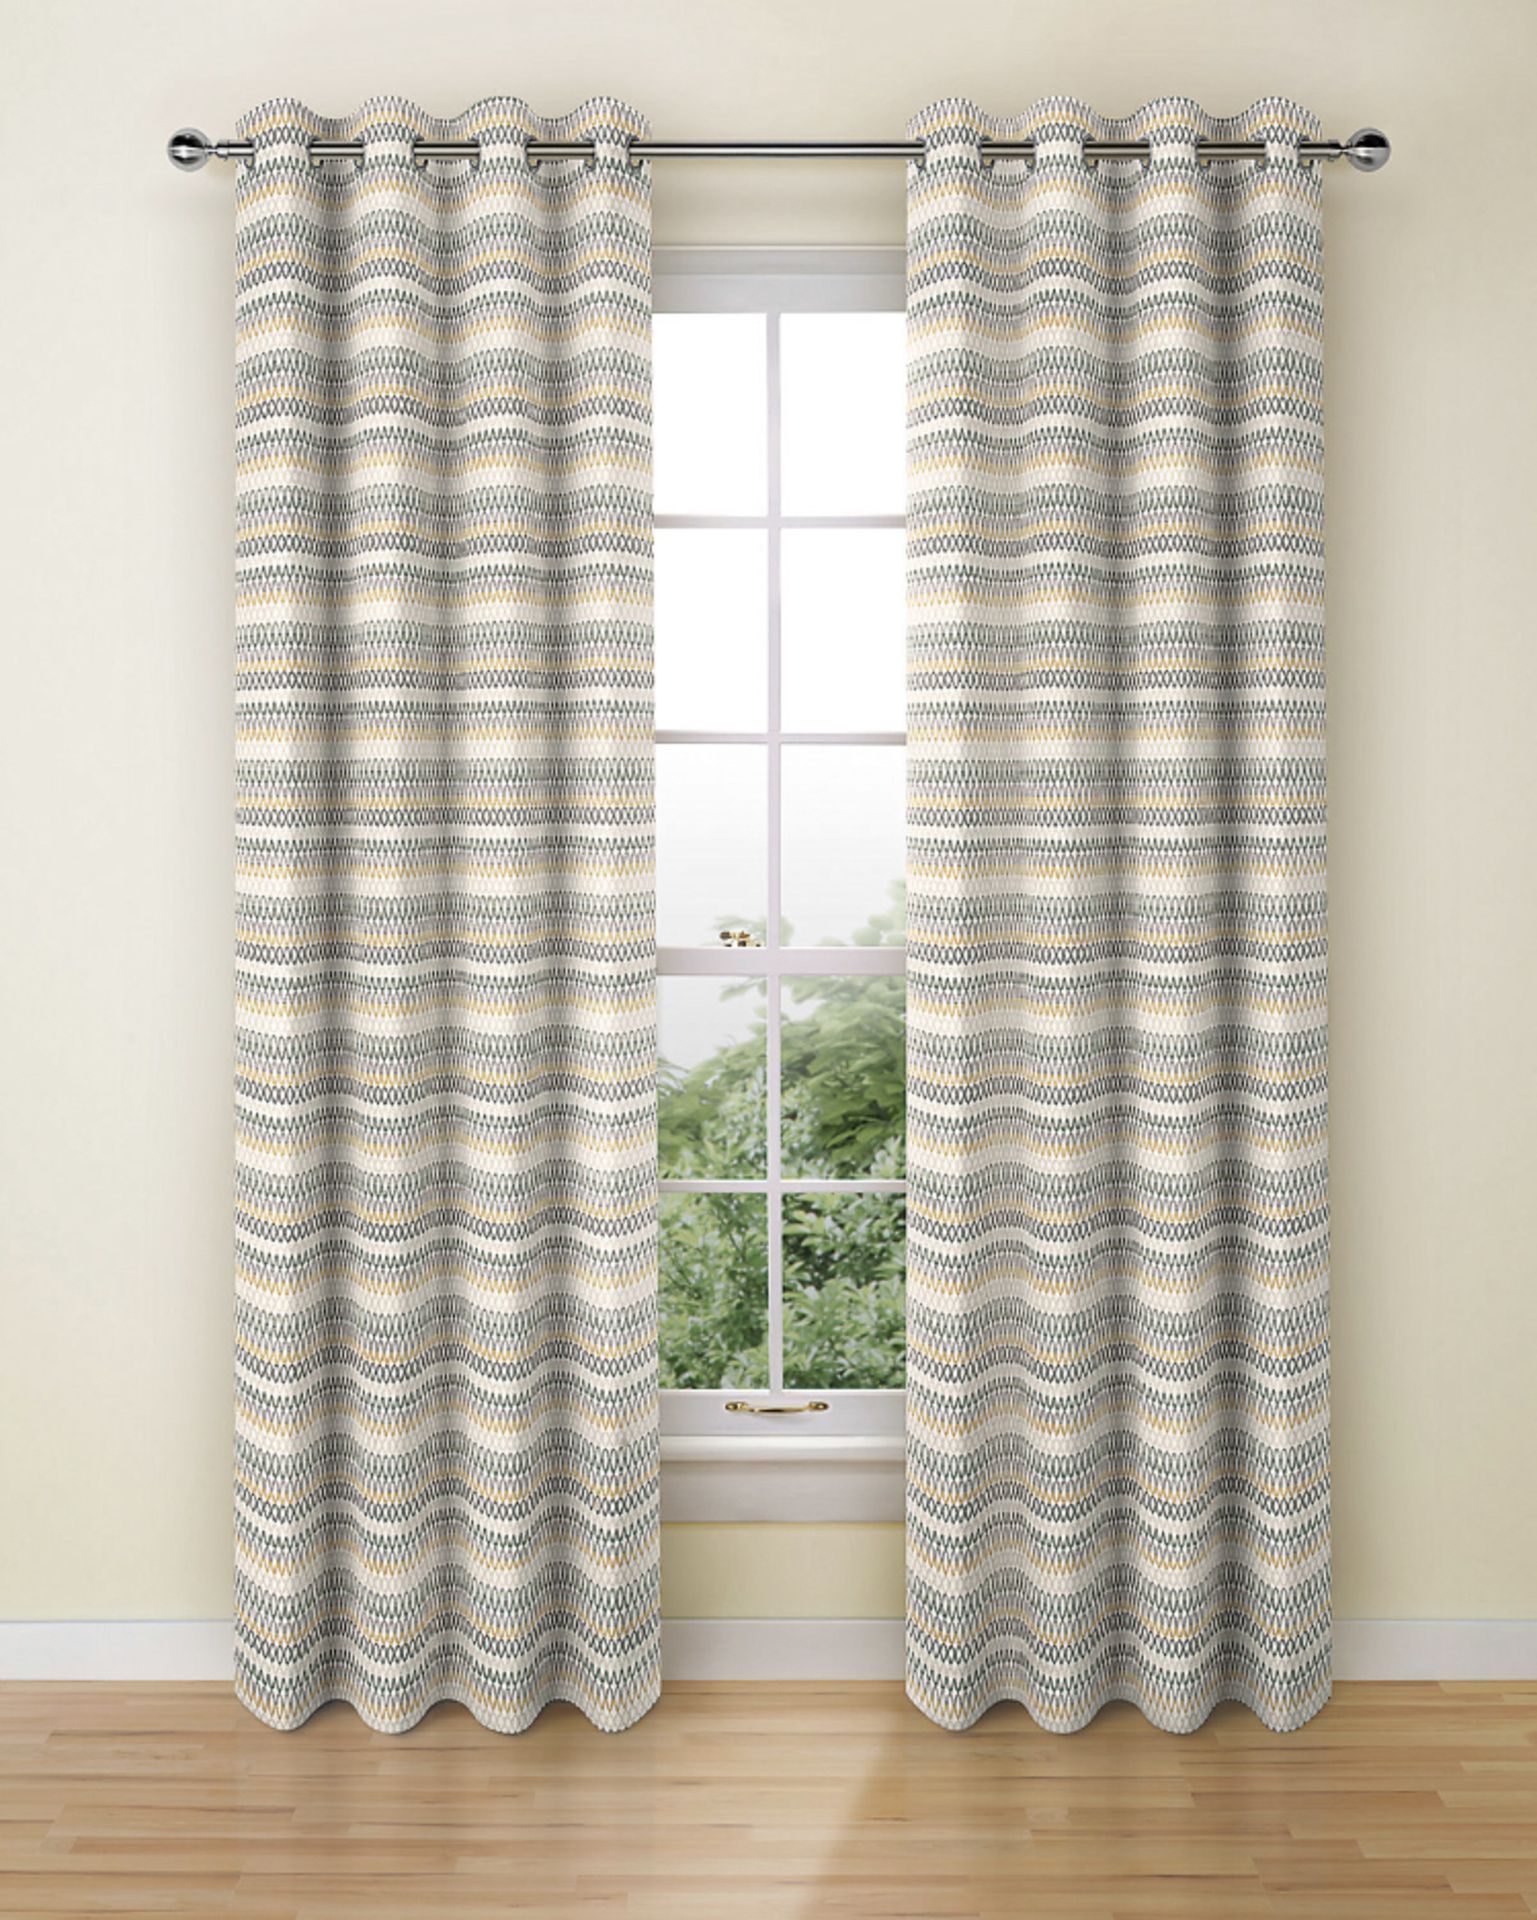 Lined Chenille Geometric Eyelet Curtains RRP £119